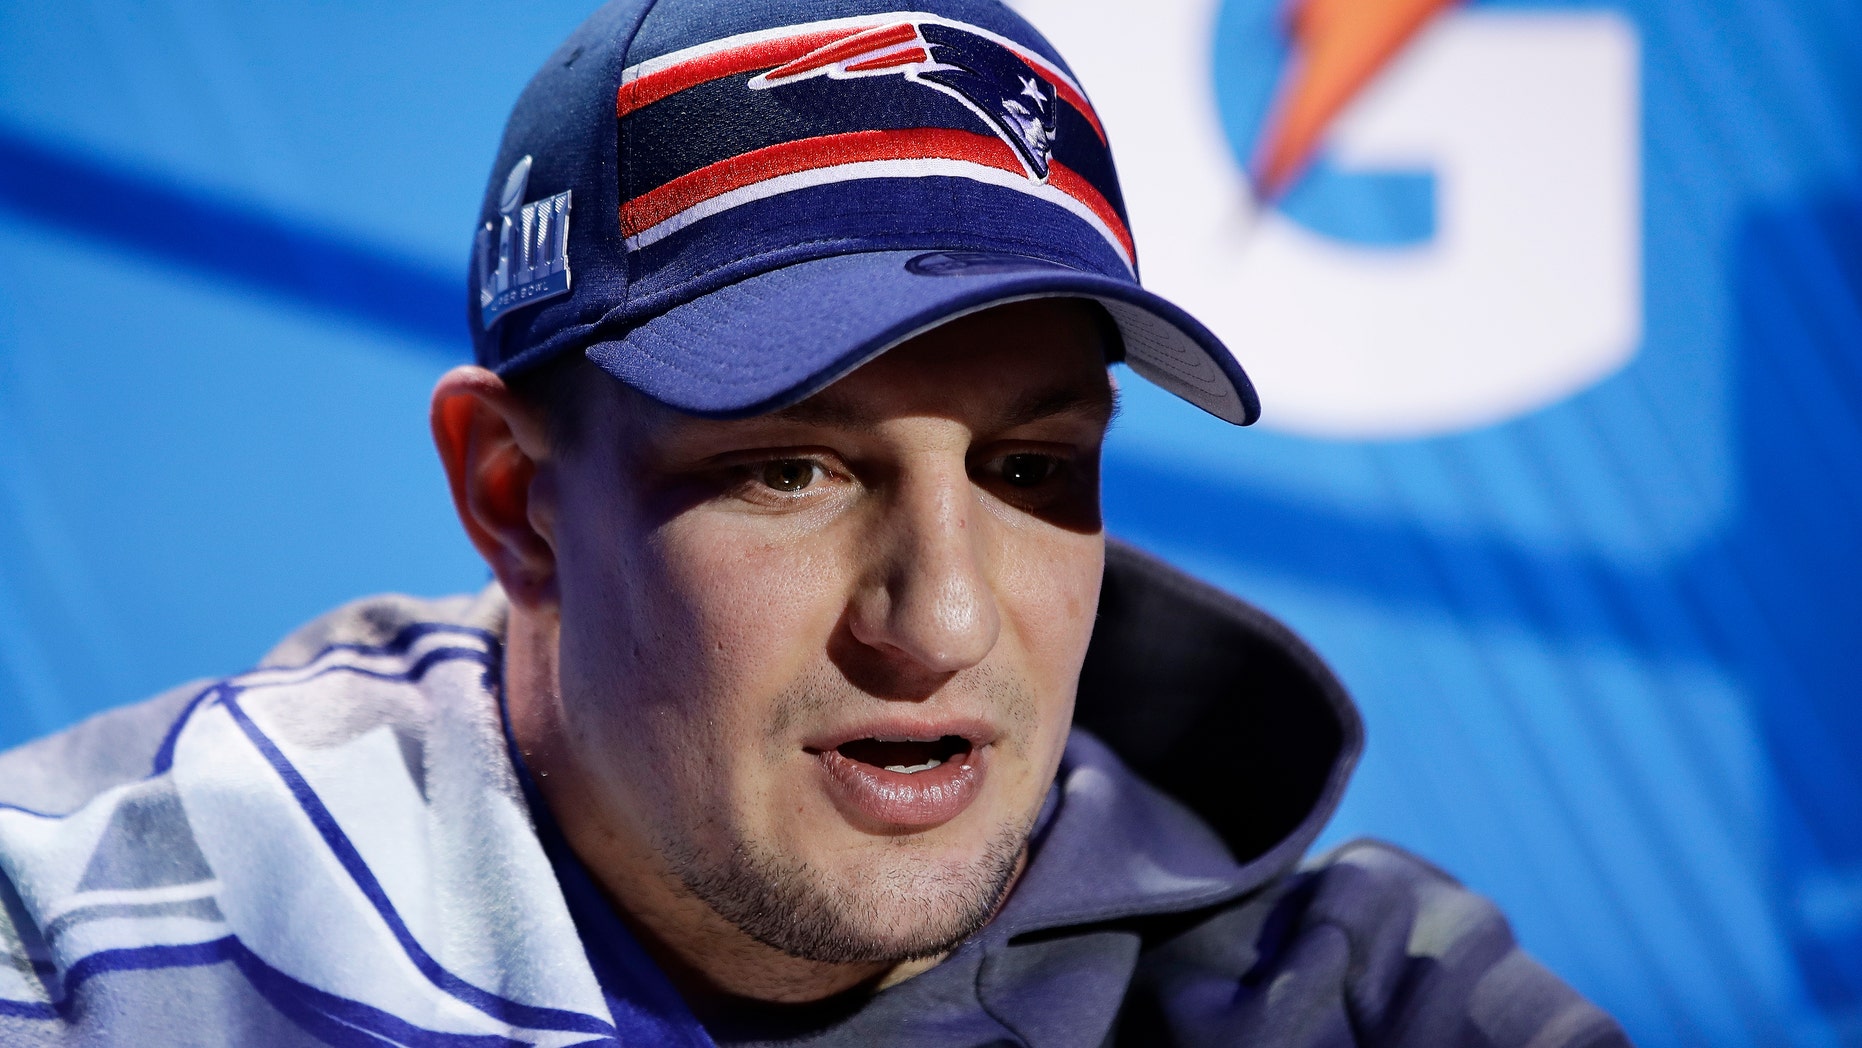 New England Patriots player Rob Gronkowski answers a question during Media Day for Super Bowl LIII, Jan. 28, 2019, in Atlanta. (Associated Press)